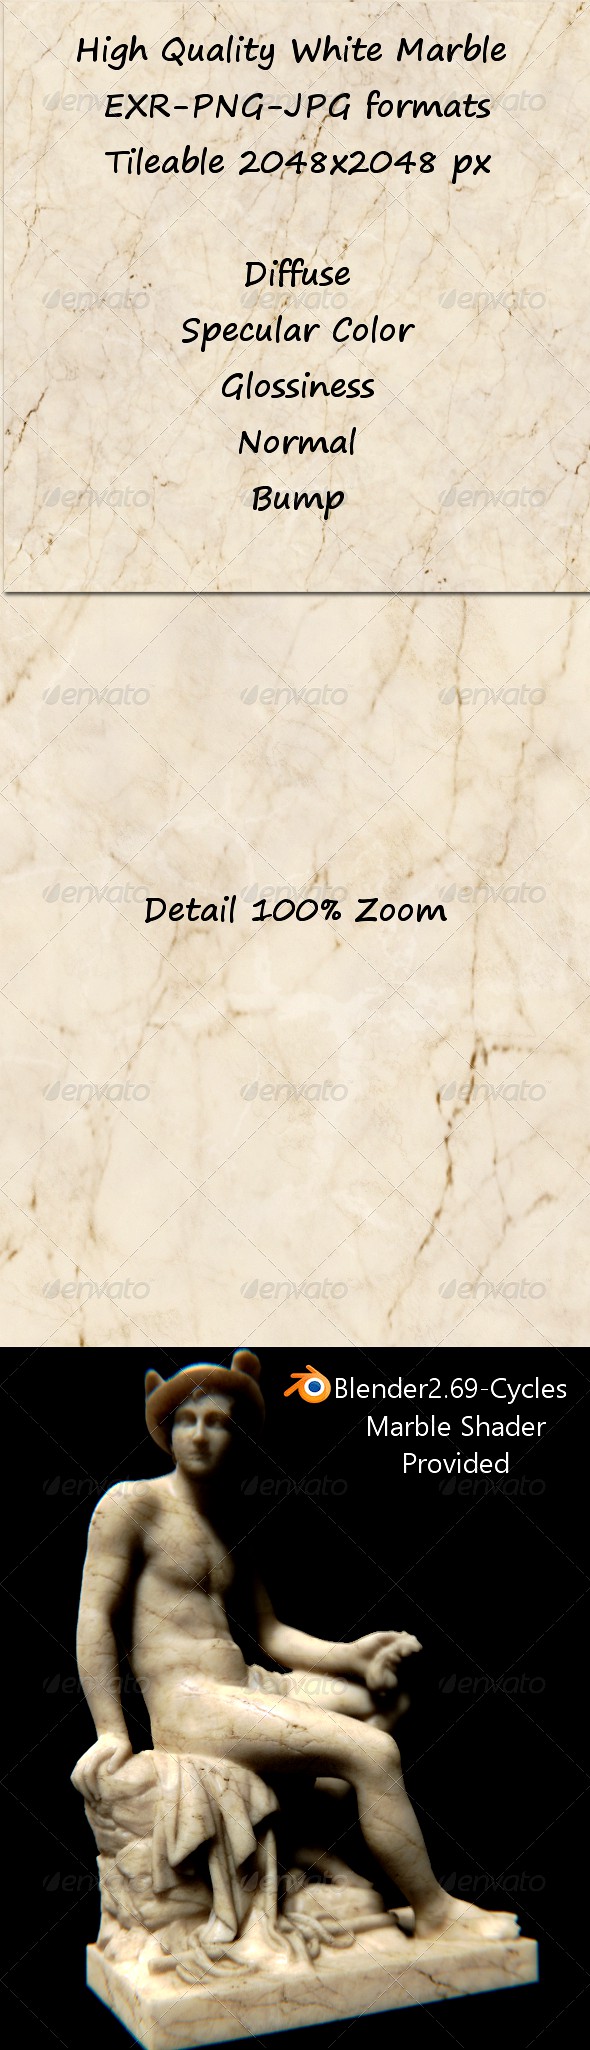 Tileable White Marble